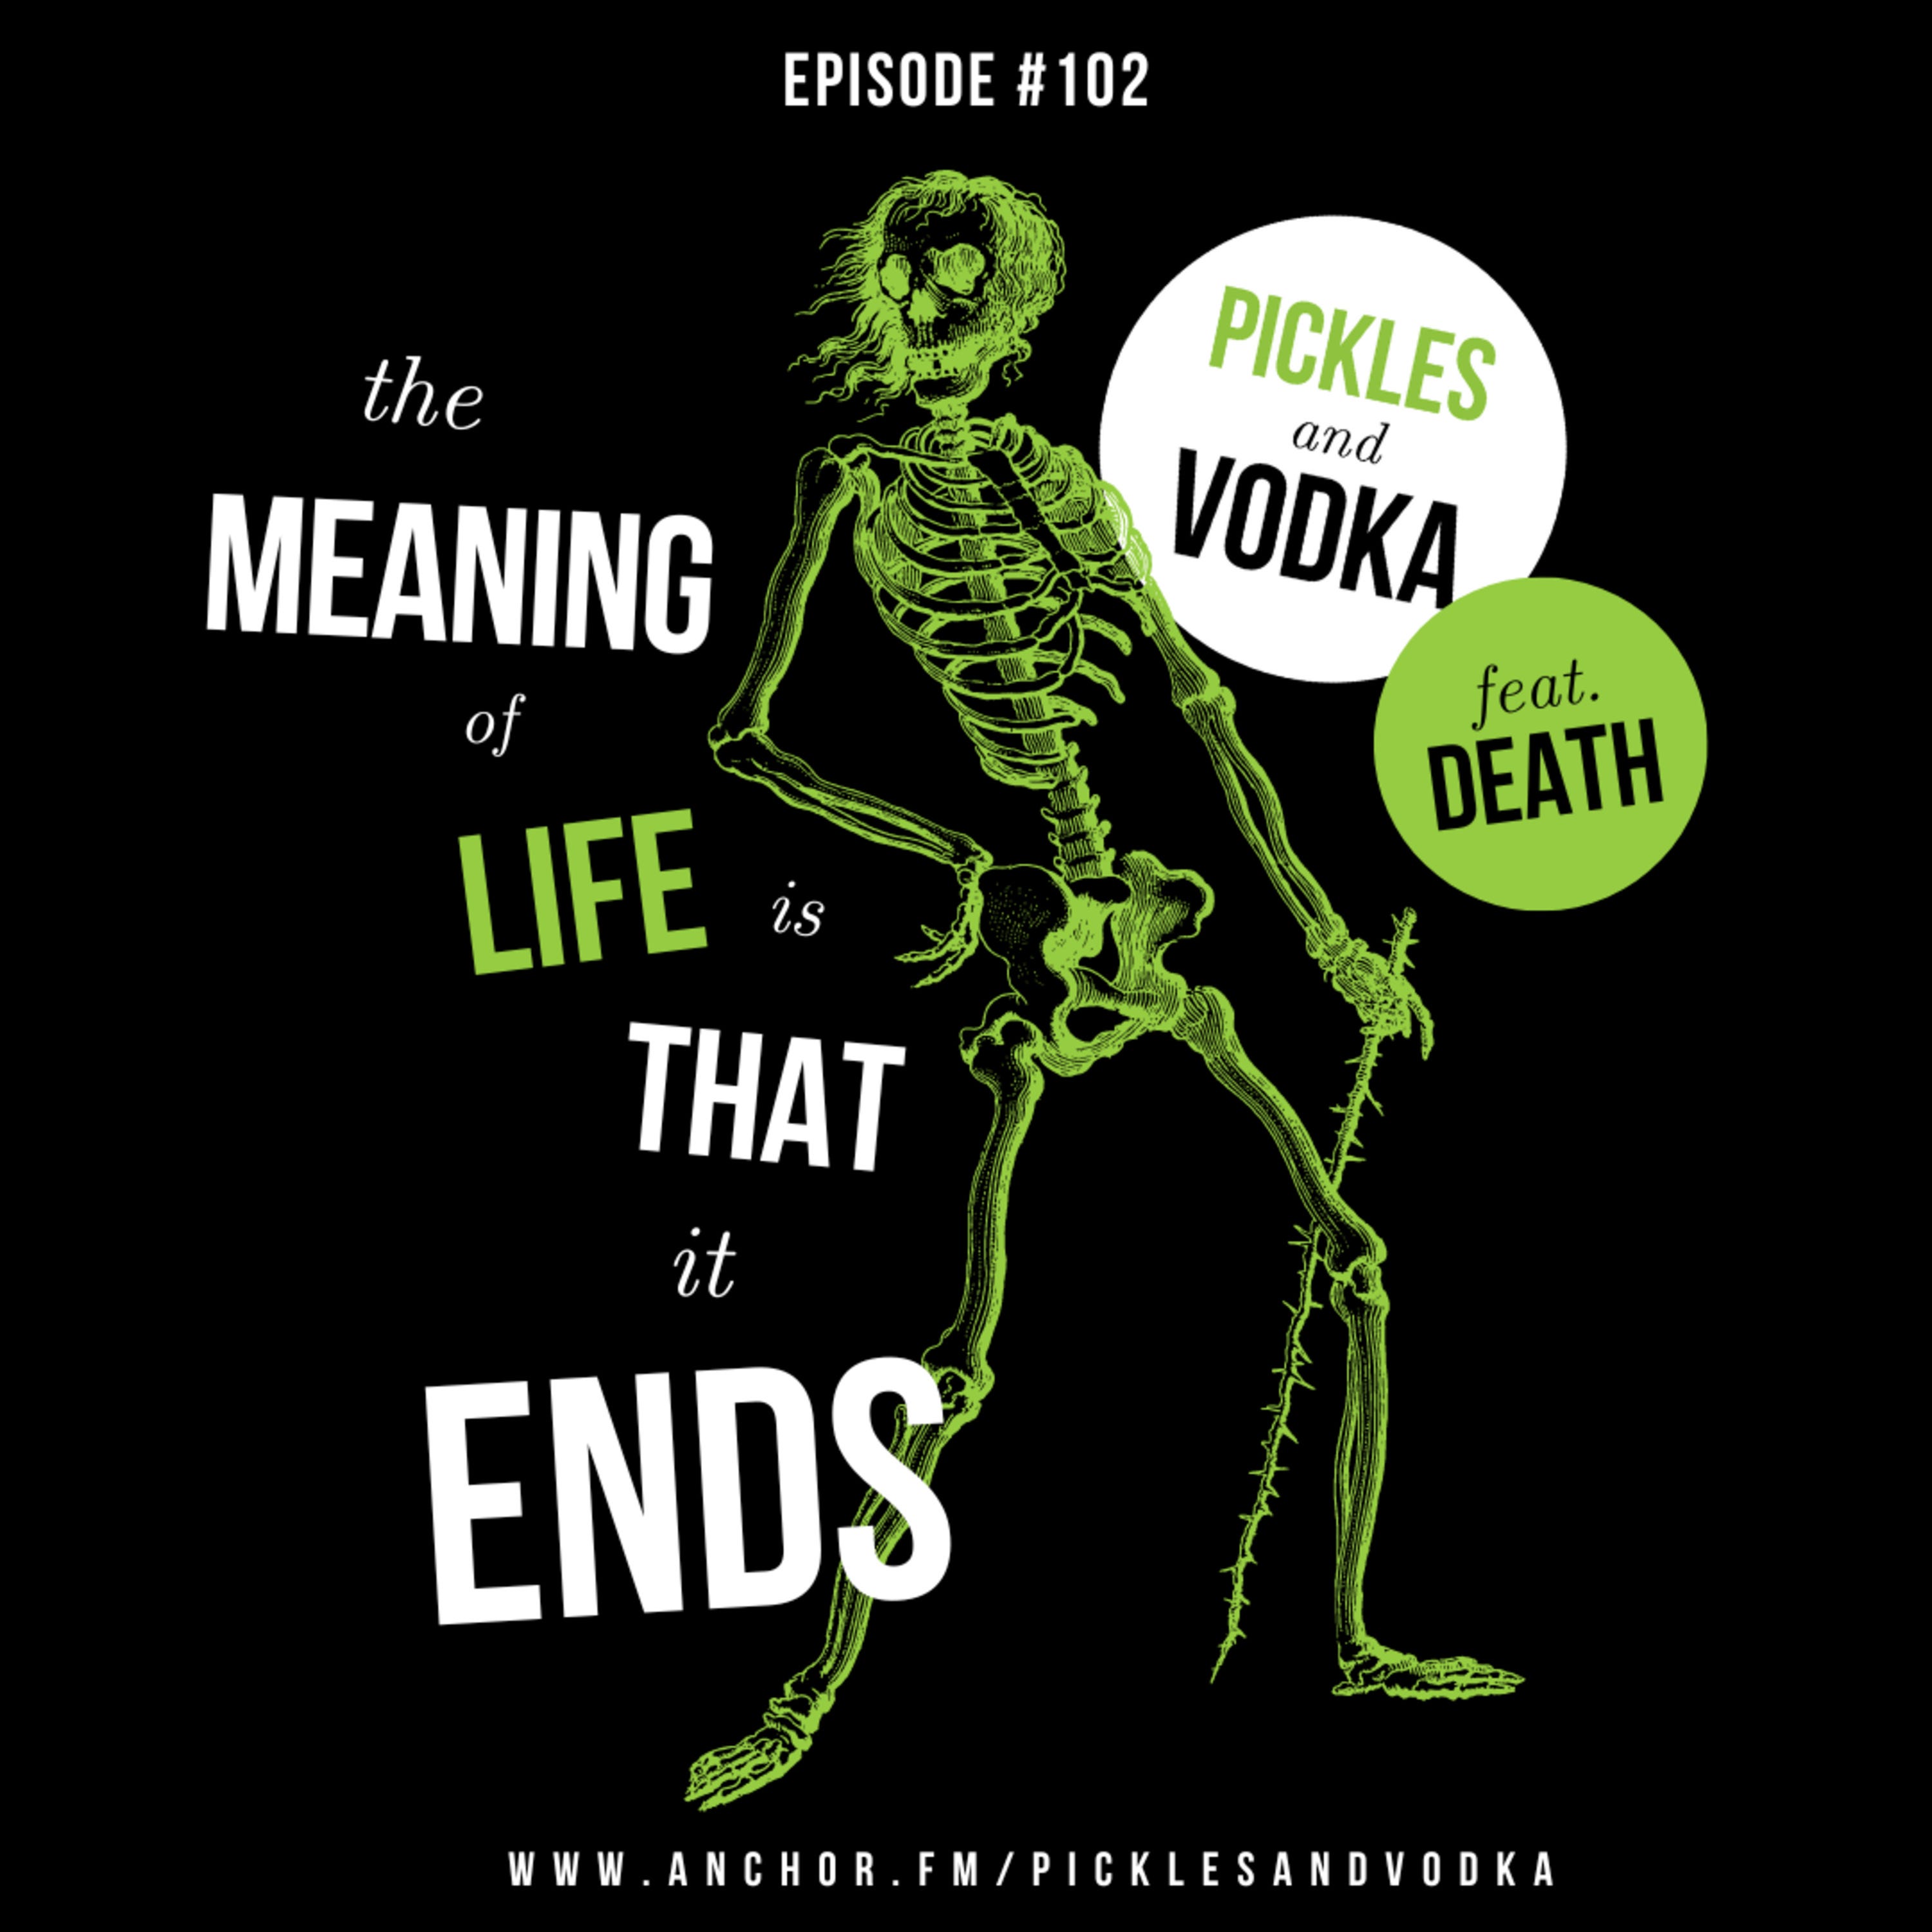 #102 The Meaning of Life is That It Stops feat. DEATH